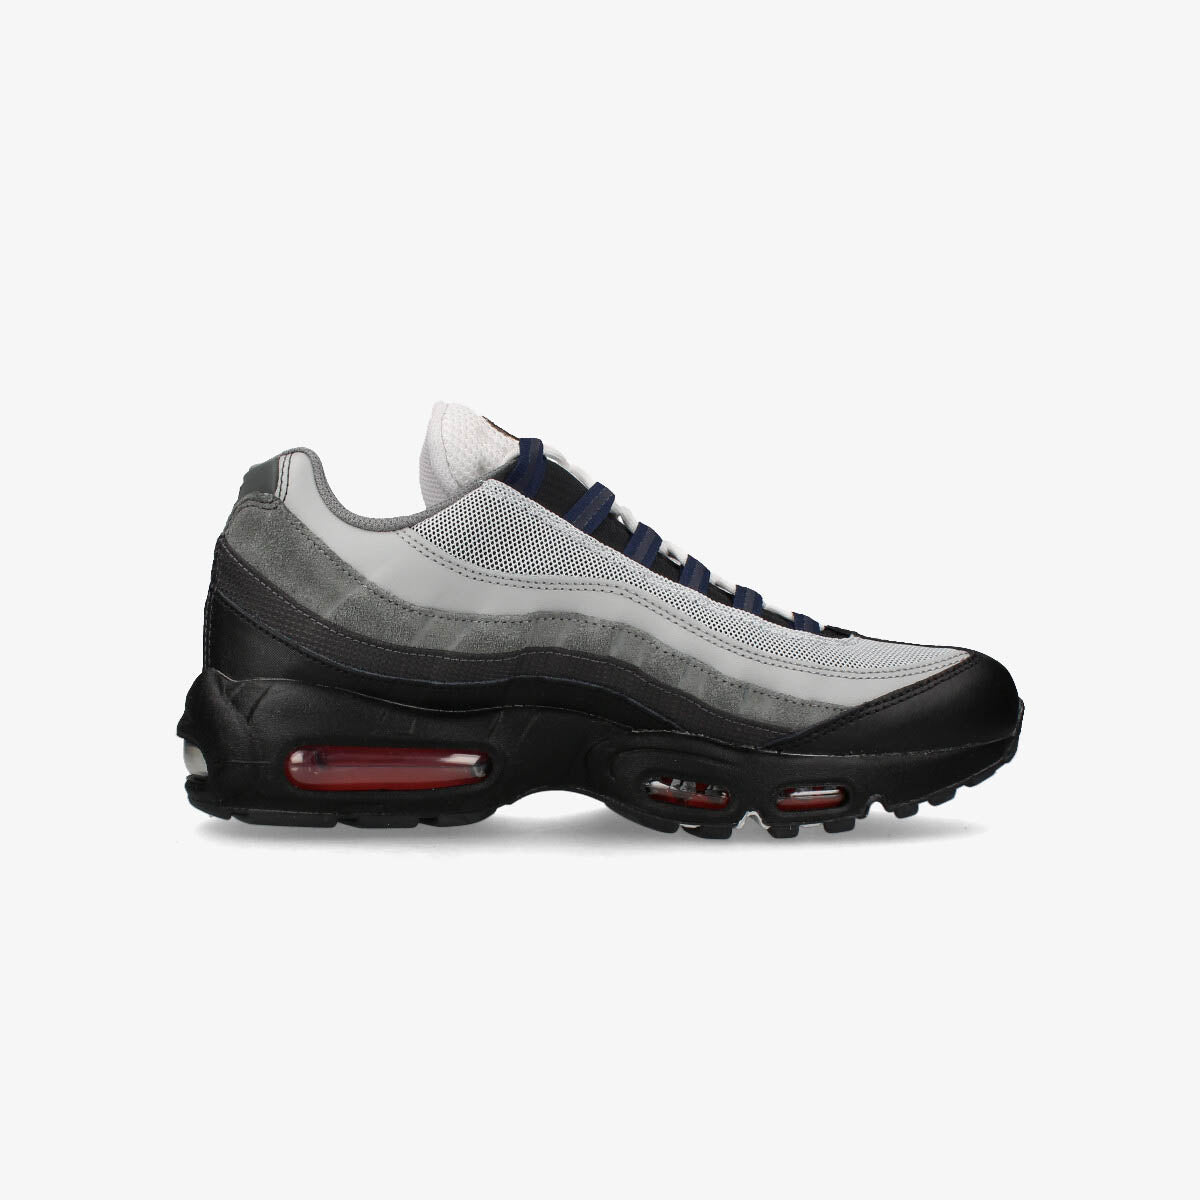 NIKE AIR MAX 95 BLACK/TRACK RED/ANTHRACITE dm0011-007